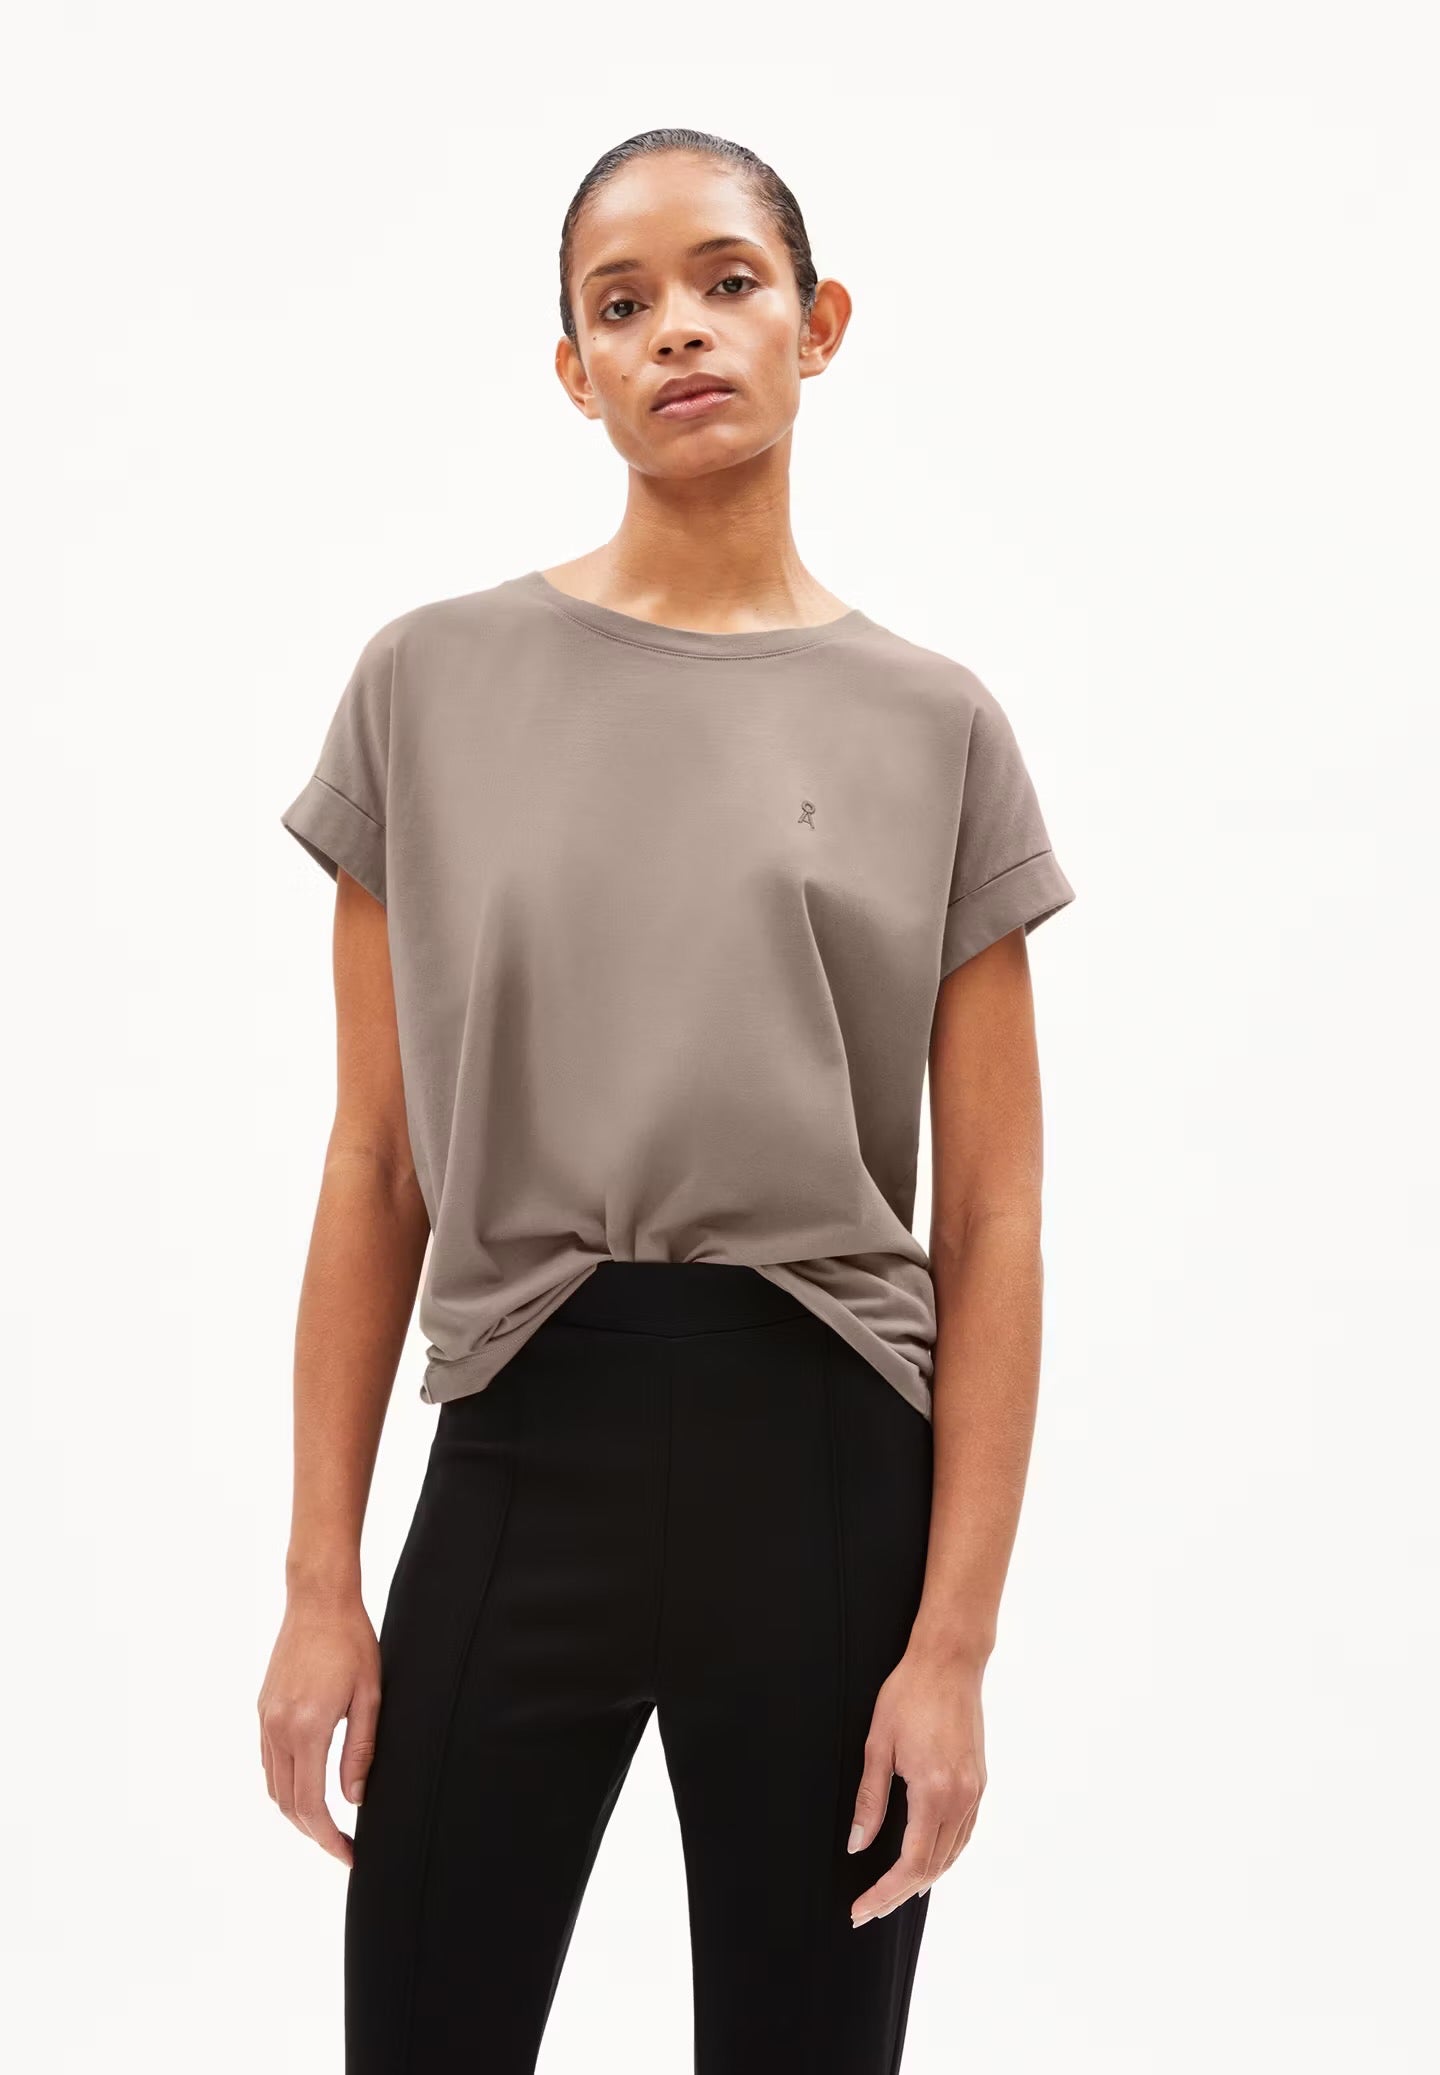 Loose fit t-shirt from Armedangels, with cap sleeves and a round neck, in a earthy light brown, made from sustainable organic cotton.